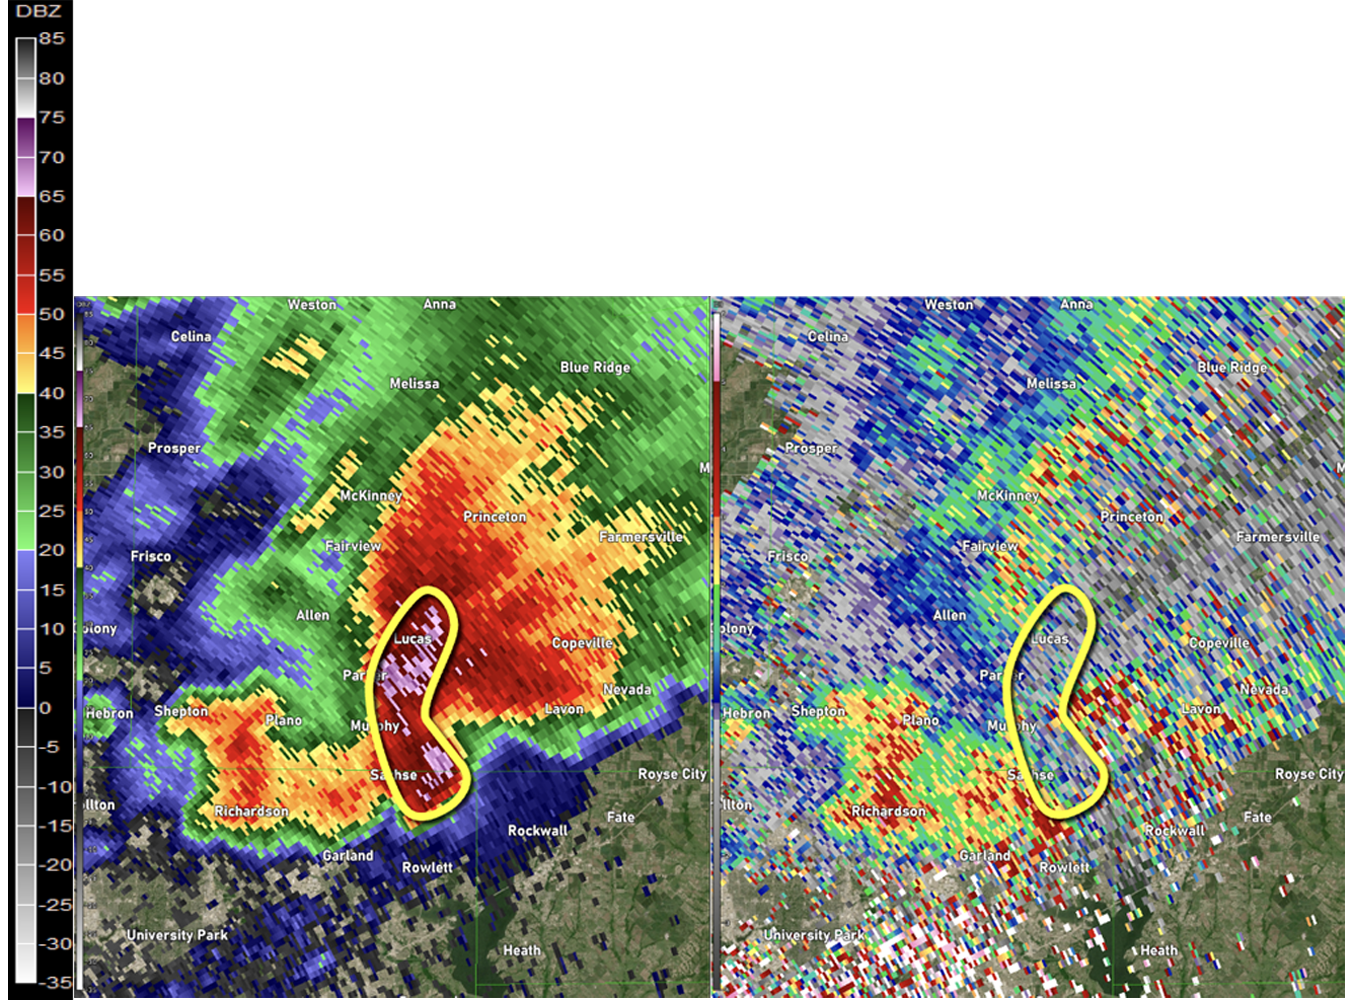 (Left): Base Reflectivity (Z) from a supercell thunderstorm near Wylie, Texas on April 11, 2016. Notice the very high reflectivity values > 65 dBZ outlined in yellow. (Right): 